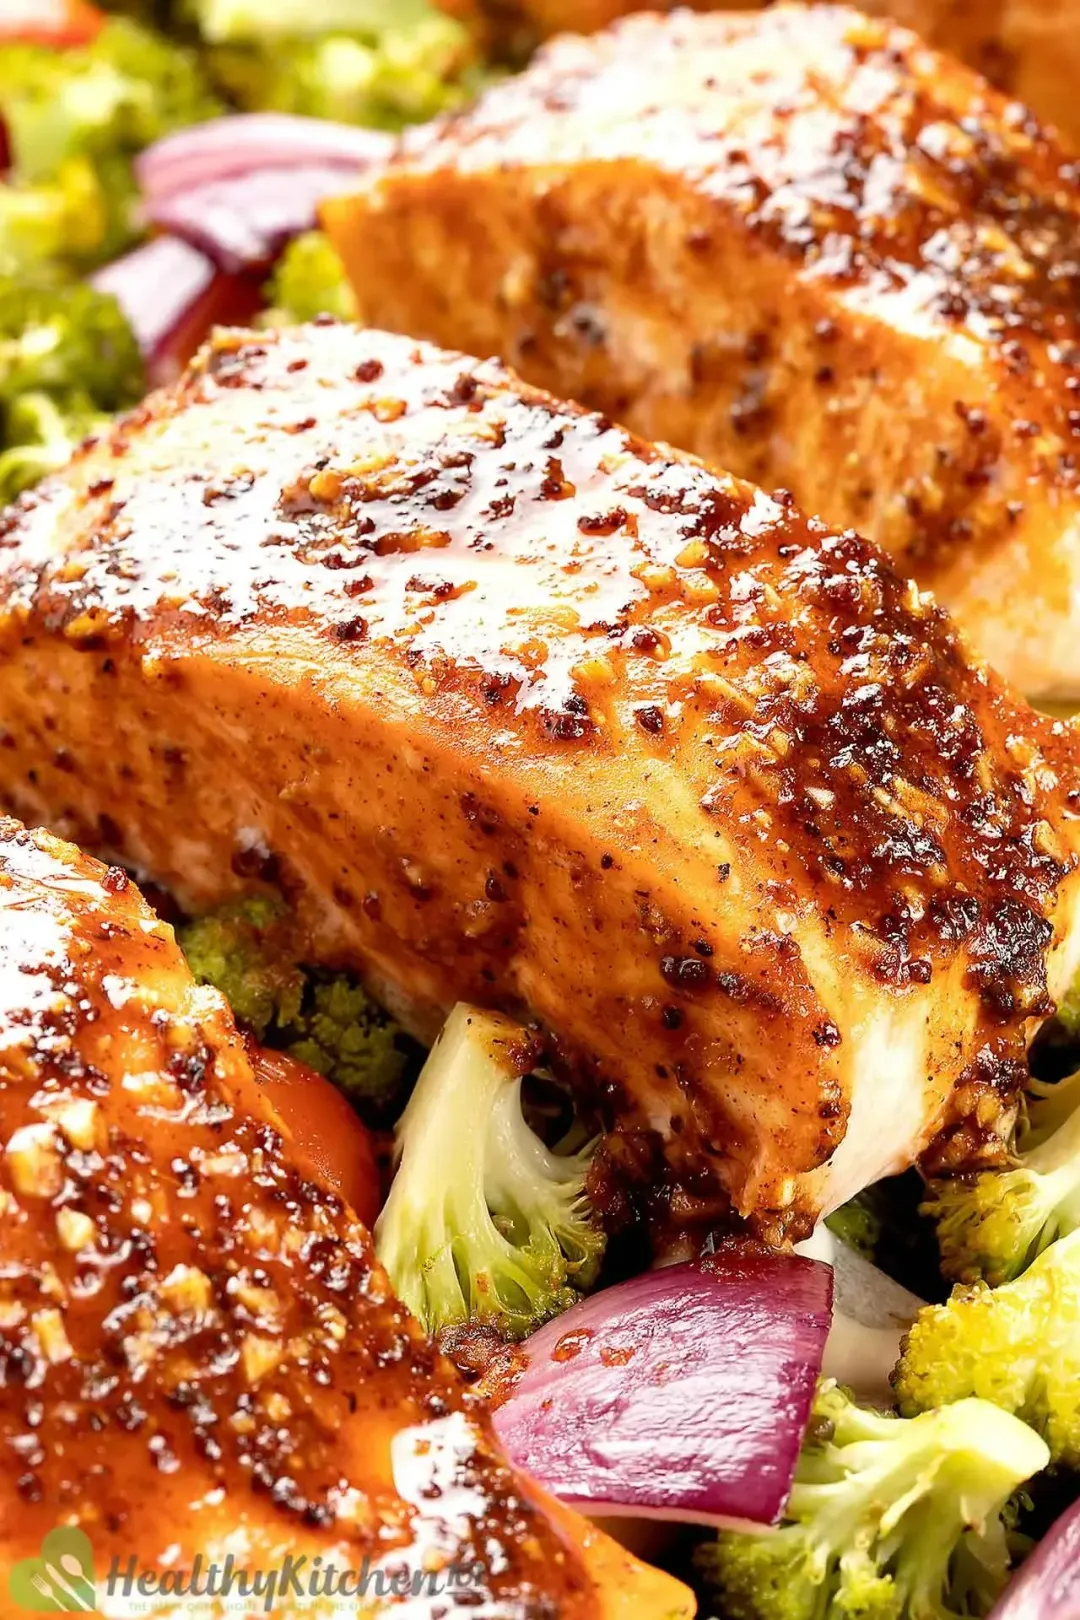 A close-up shot of salmon fillets covered in a glossy brown sauce and surrounded by broccoli florets and red onion pieces